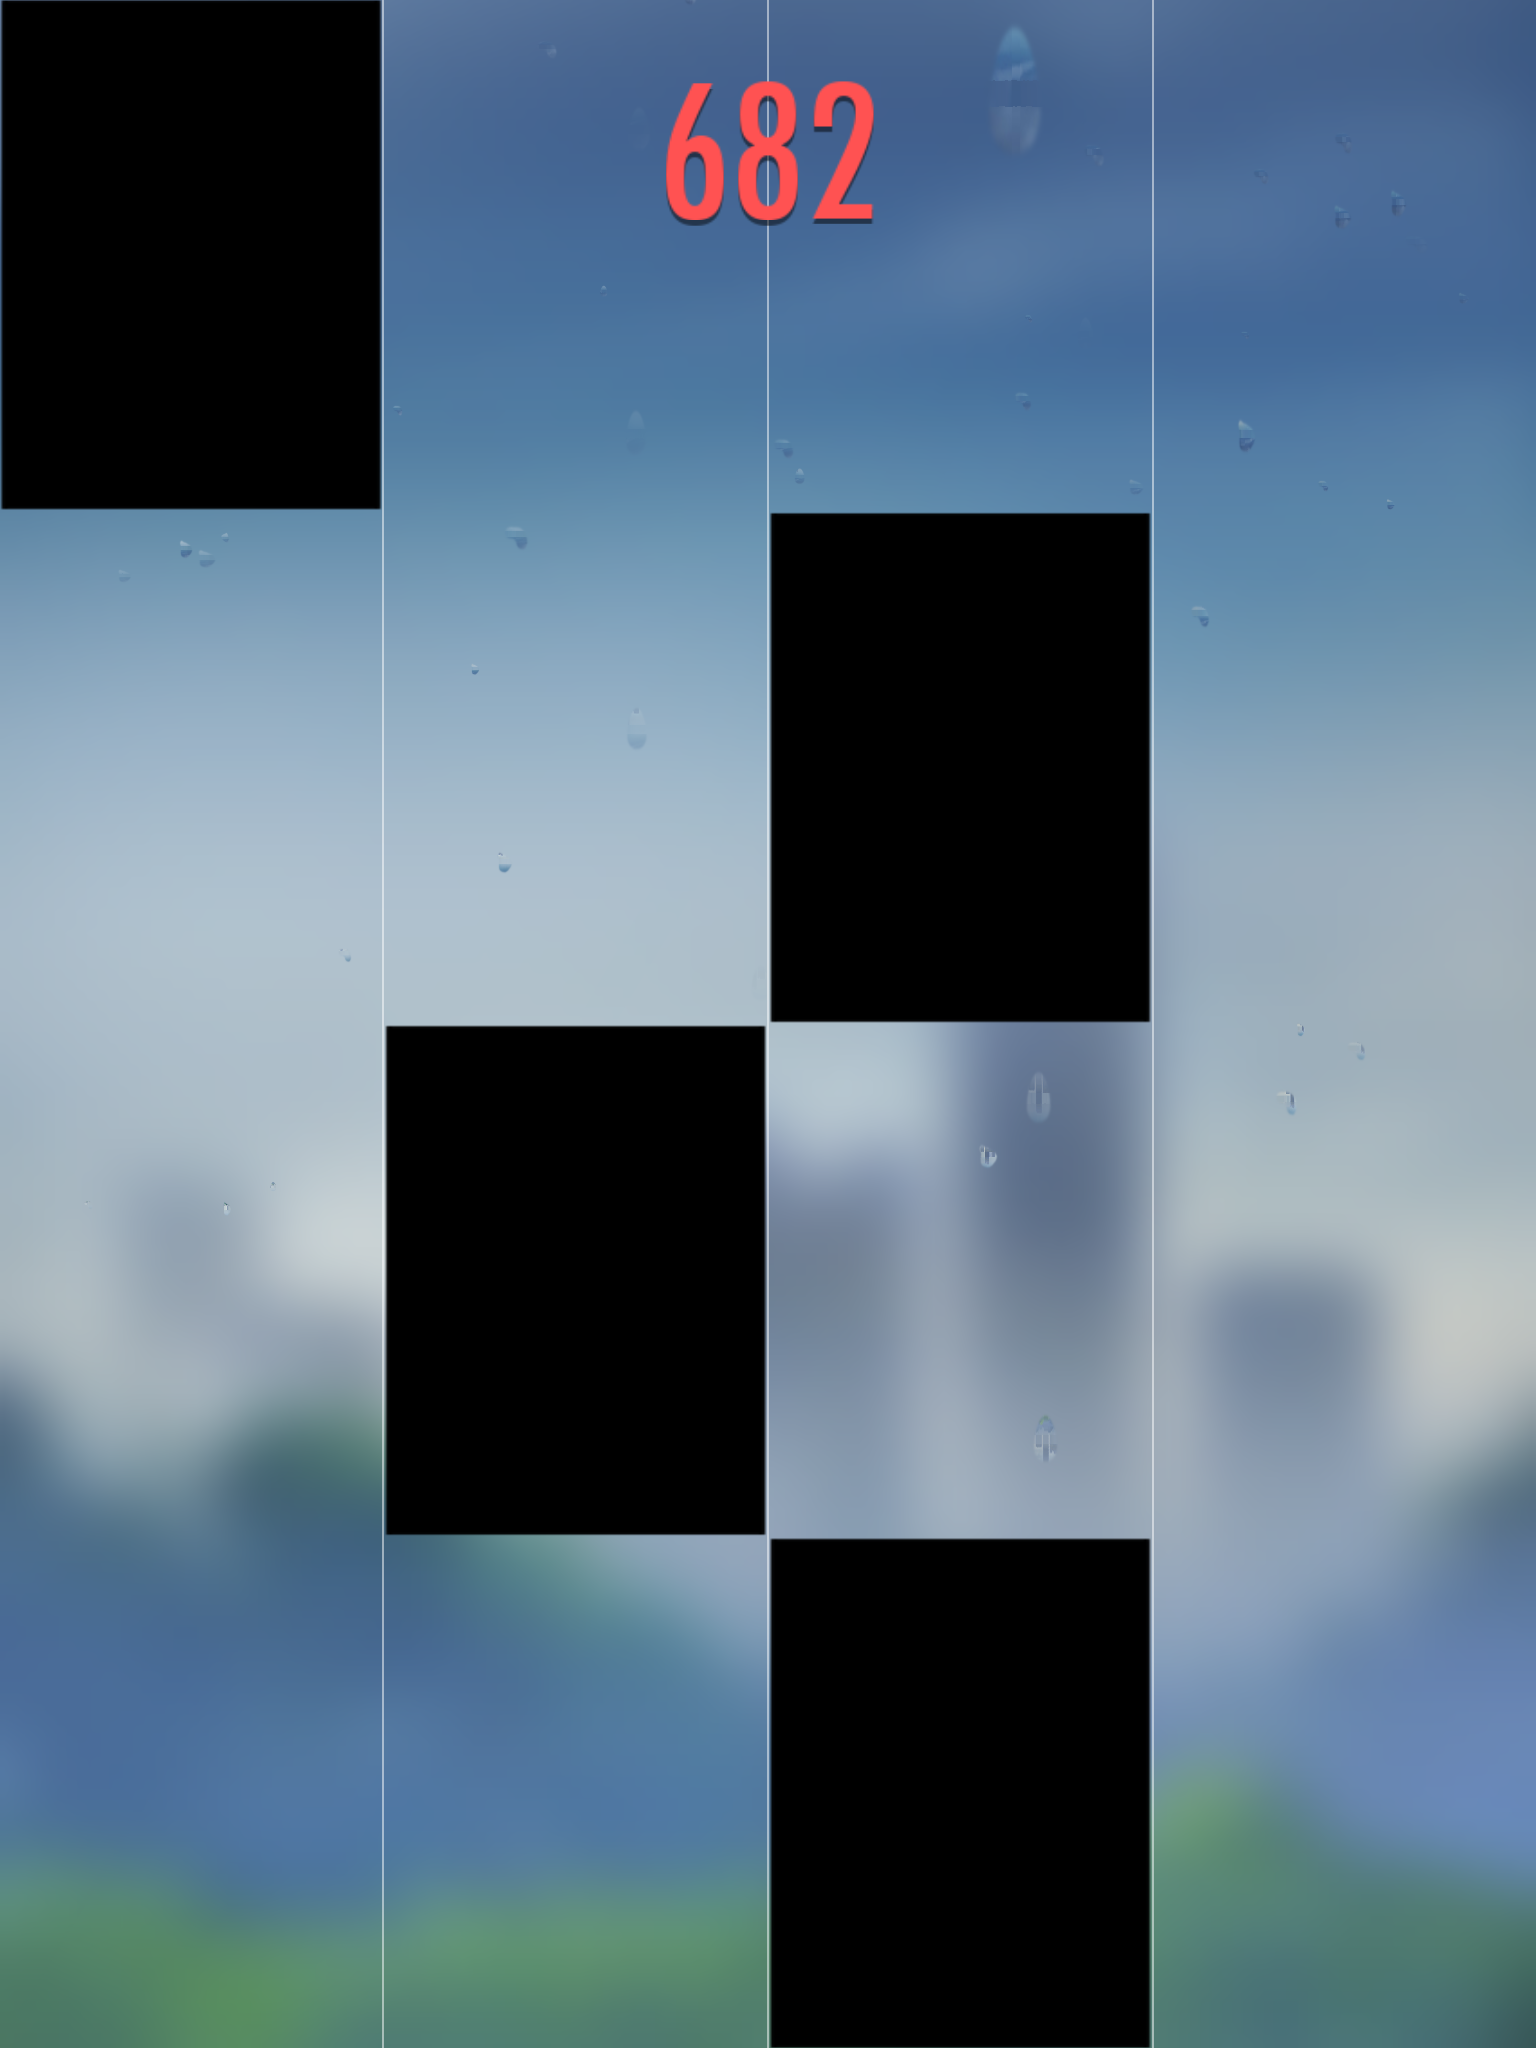 piano tiles 2 game compensation